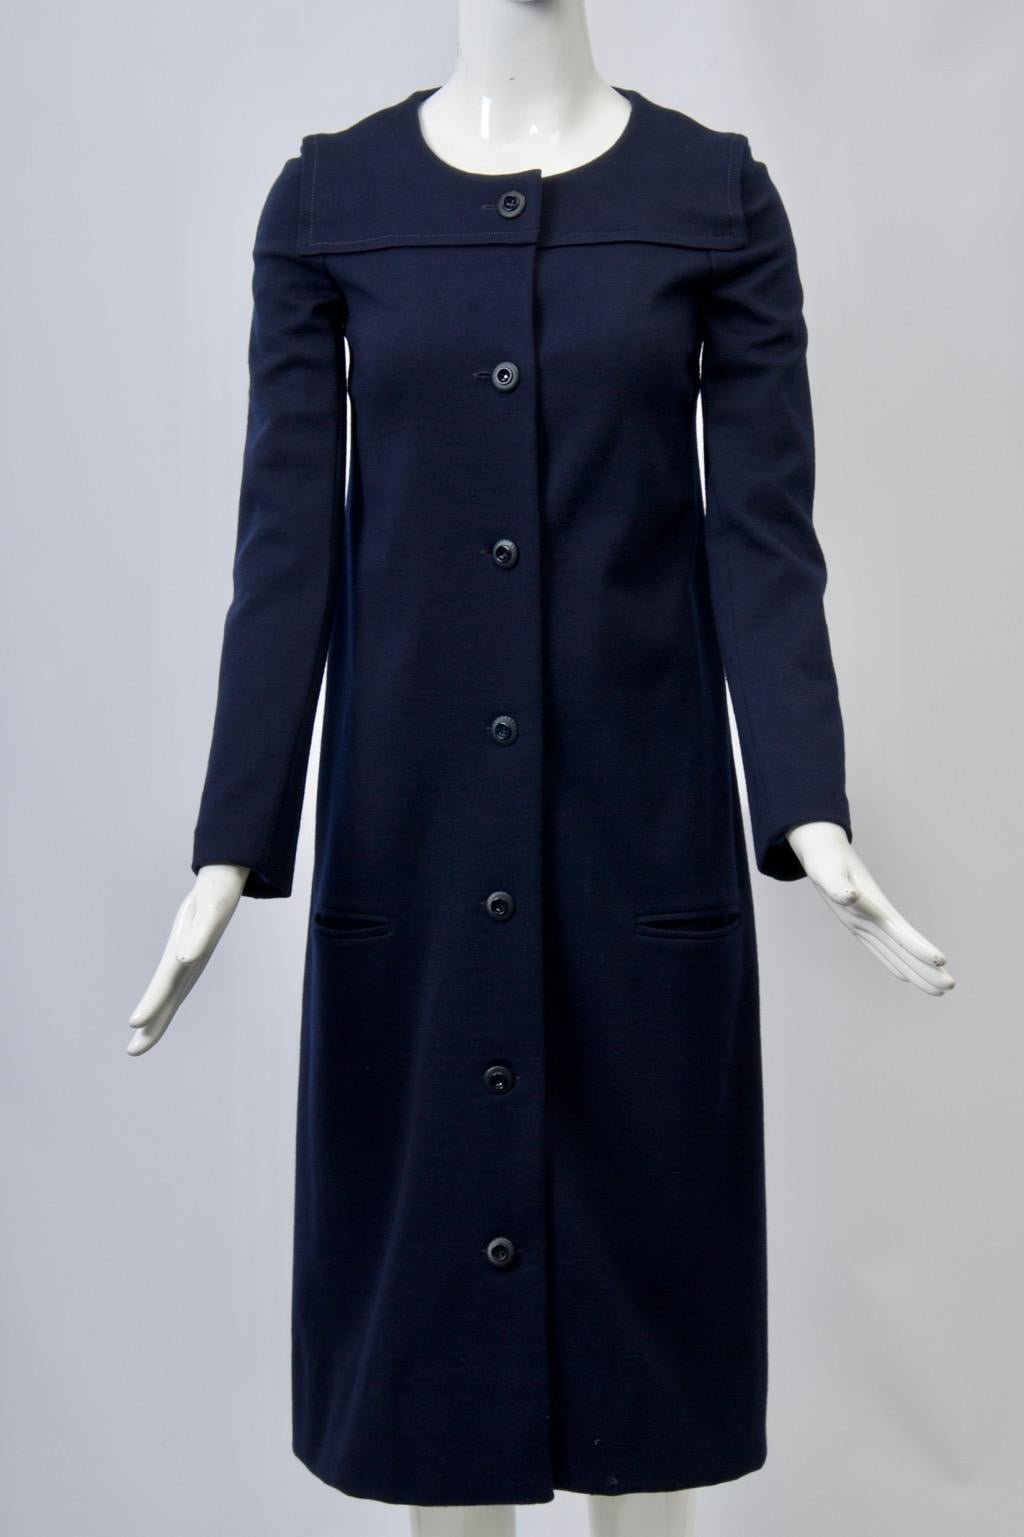 1970s dress and coat ensemble in navy wool knit by Sonia Rykiel. The slim coat features a top-stitched yolk detail, a round neckline, and single-breasted closure fully buttoned down the front. The long sleeve dress skims the body and has a